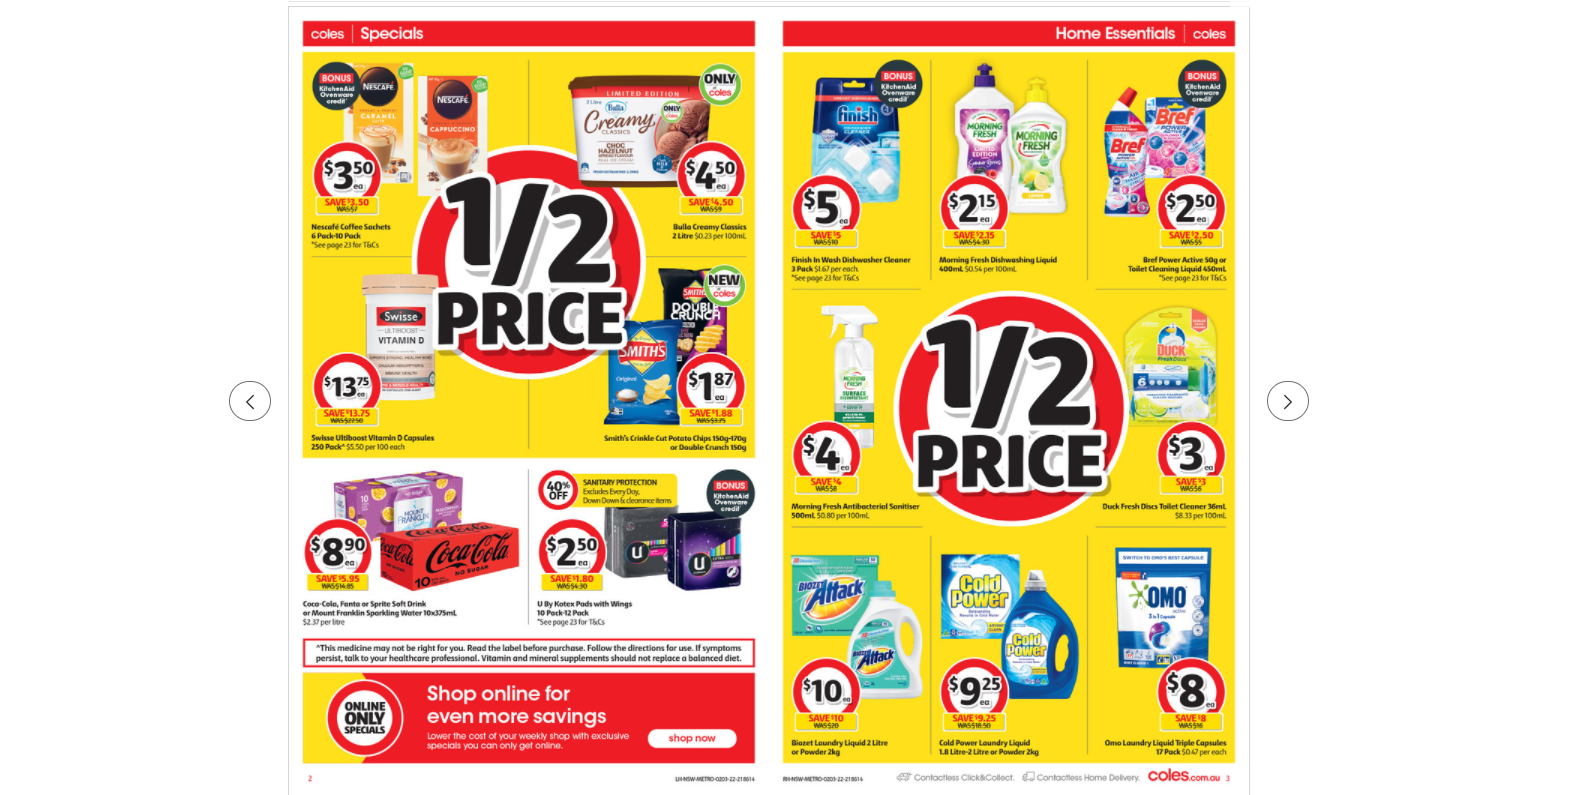 Coles this week's catalogue up to 50% OFF on groceries, beauty & everyday essentials(until 8th Mar)